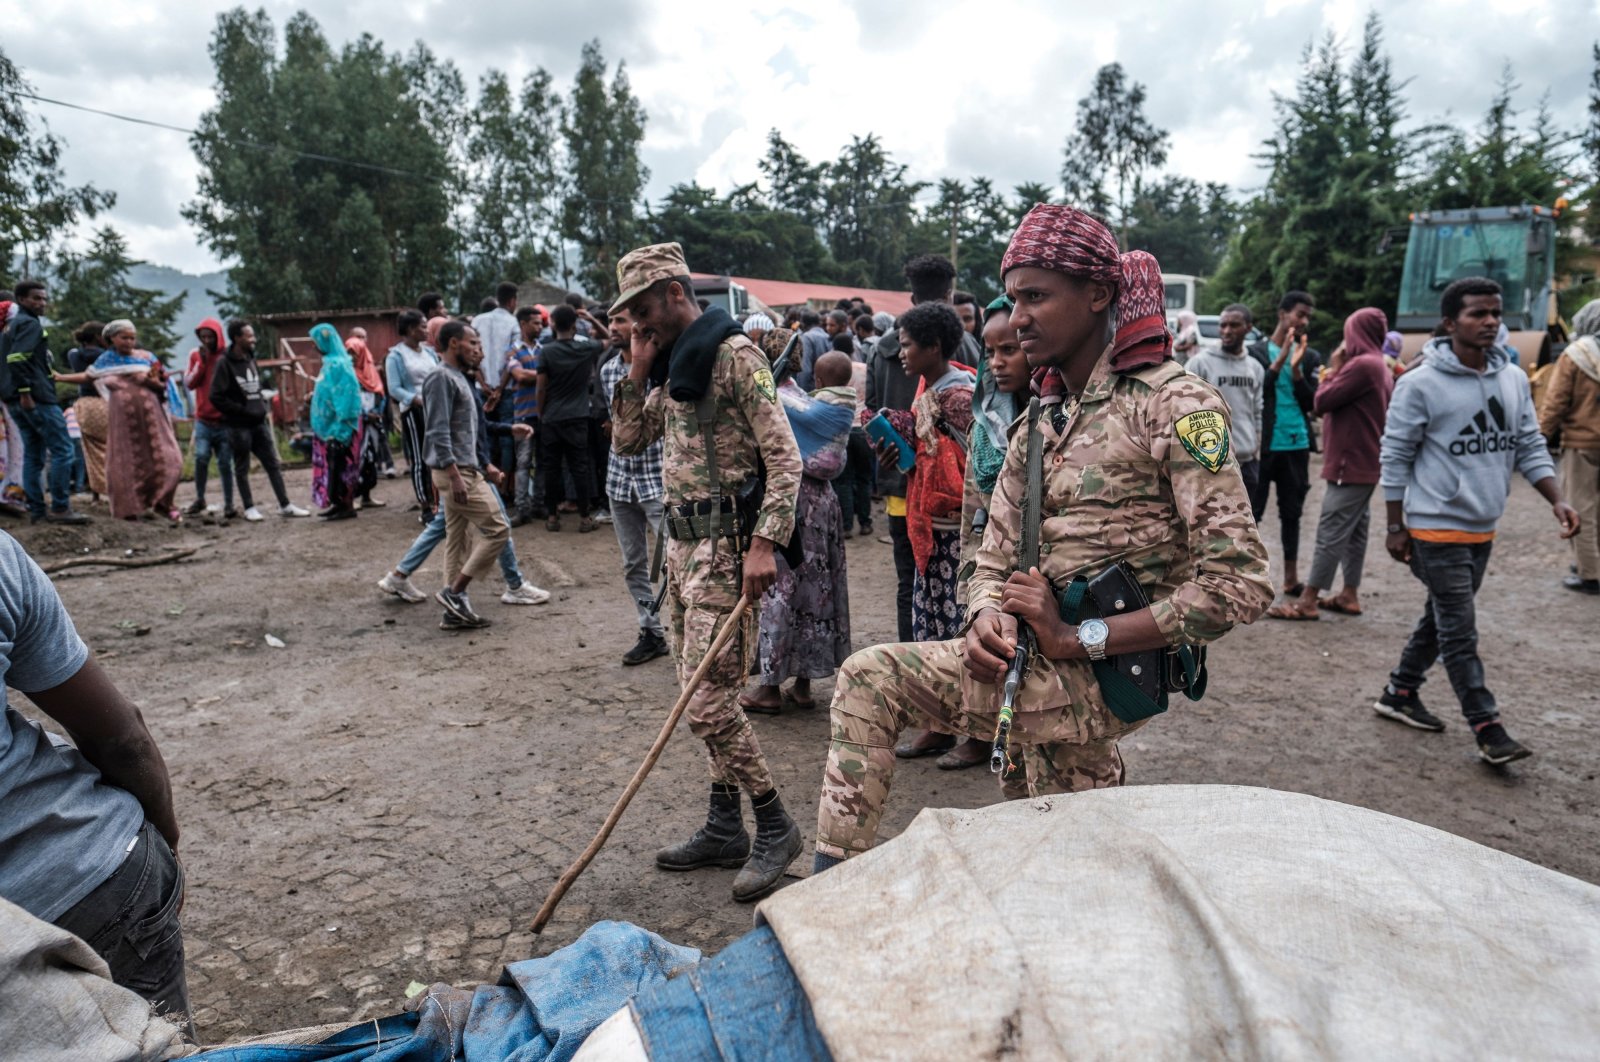 Members of the Special Force of the Amhara Police stand next to sacks of food during a food distribution for internally displaced people (IDP) from the Amhara region, in the city of Dessie, Ethiopia, Aug. 23, 2021. (Photo by Eduardo Soteras via AFP Photo)